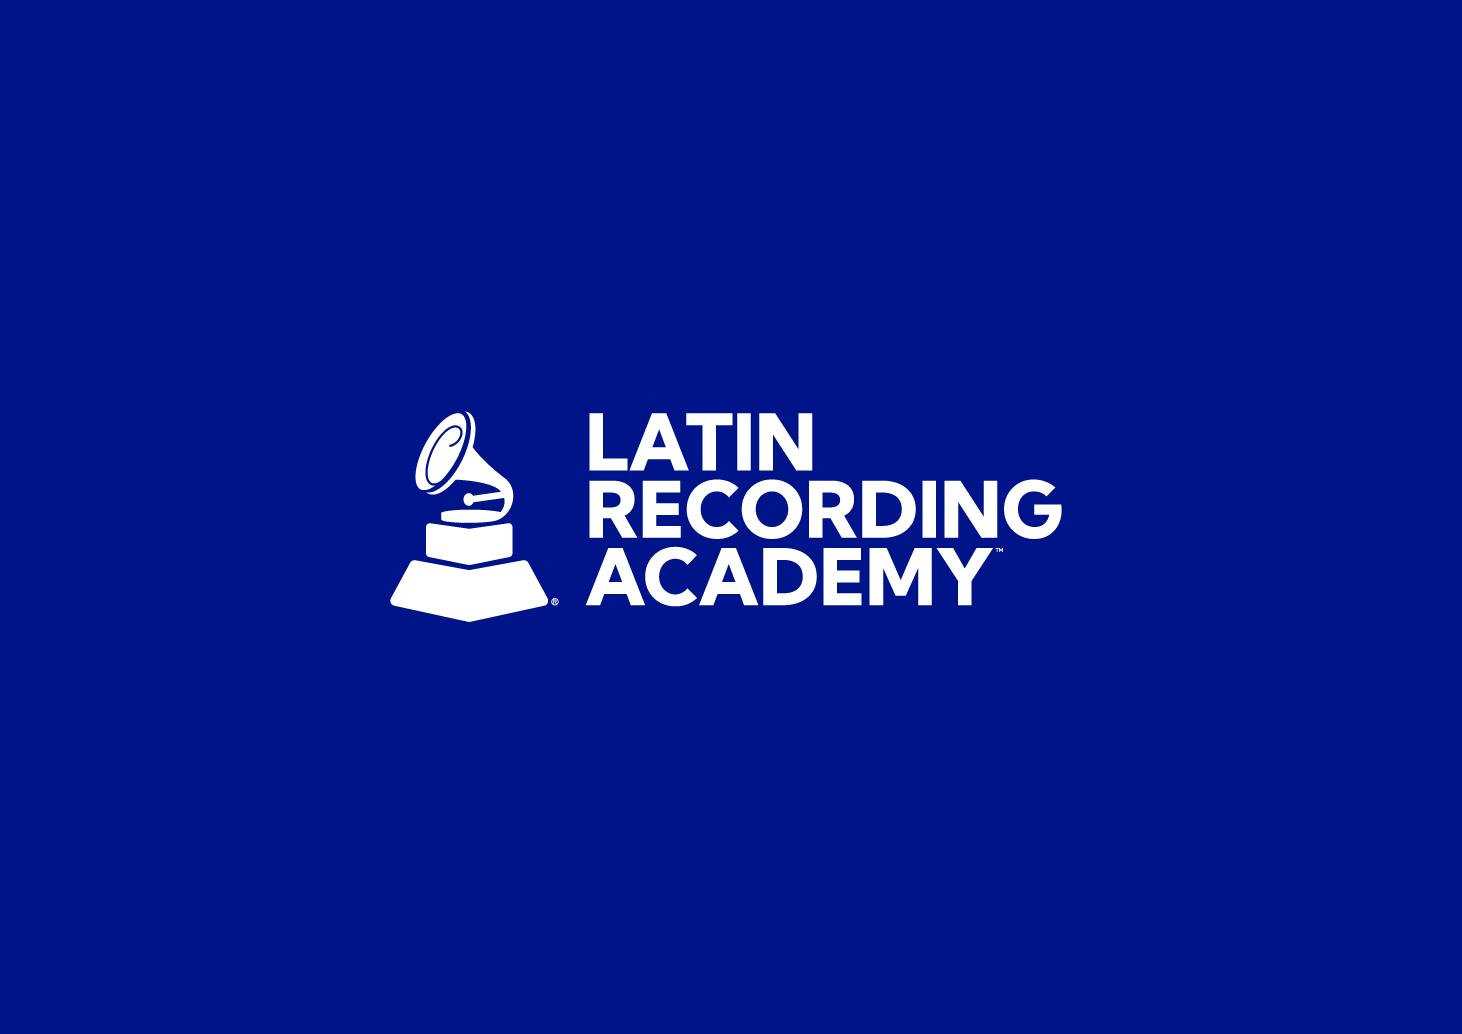 Graphic featuring logo of the Latin Recording Academy